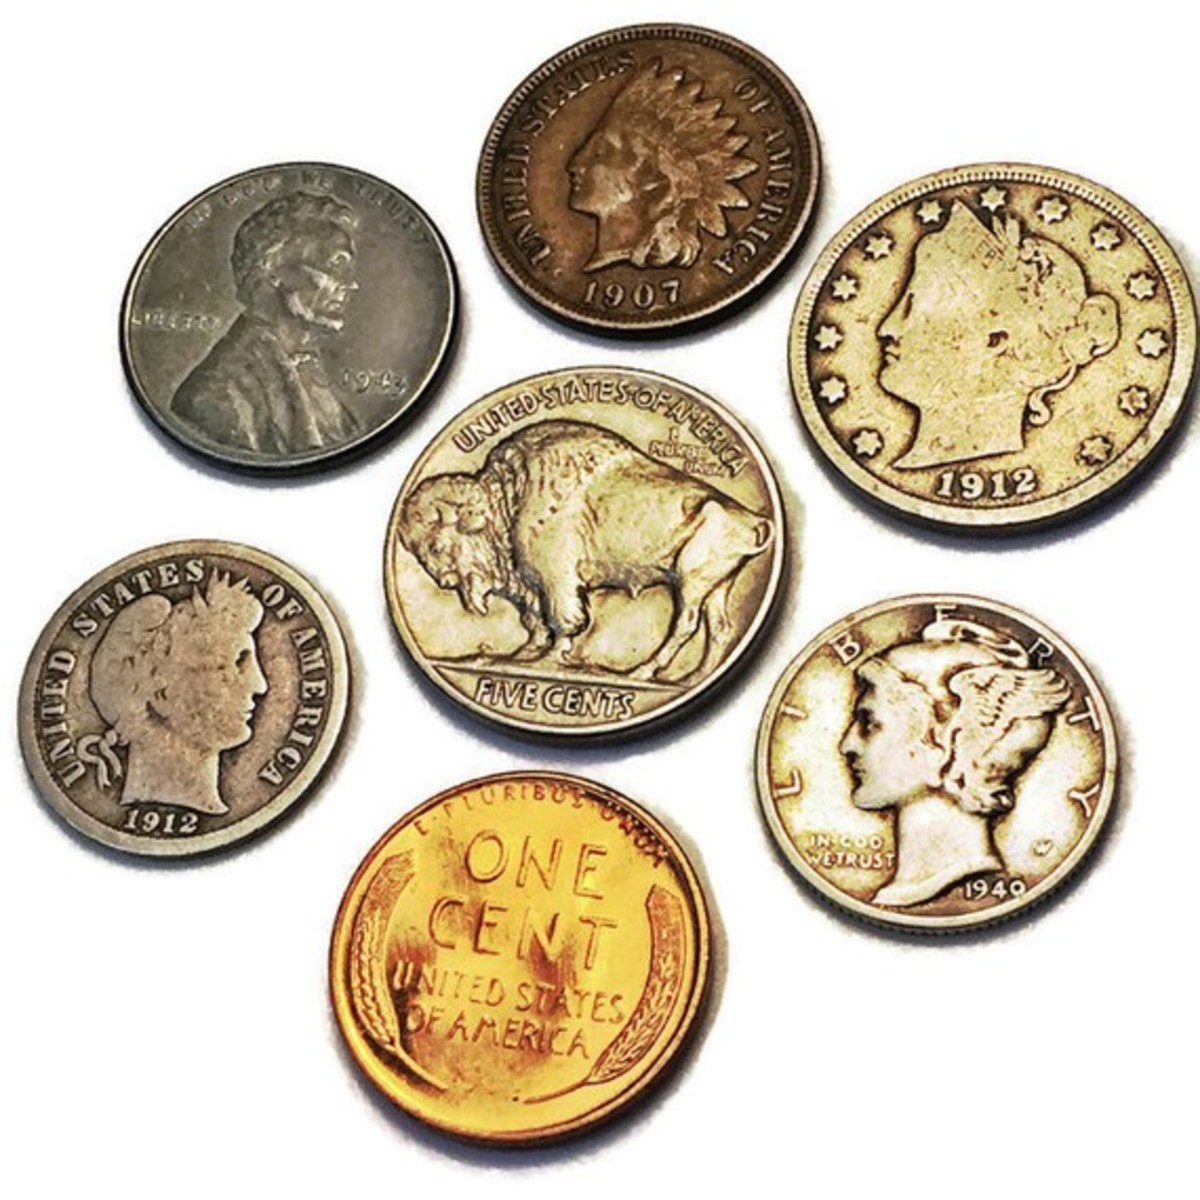 Old Collections Resurfacing at Auction - Numismatic News